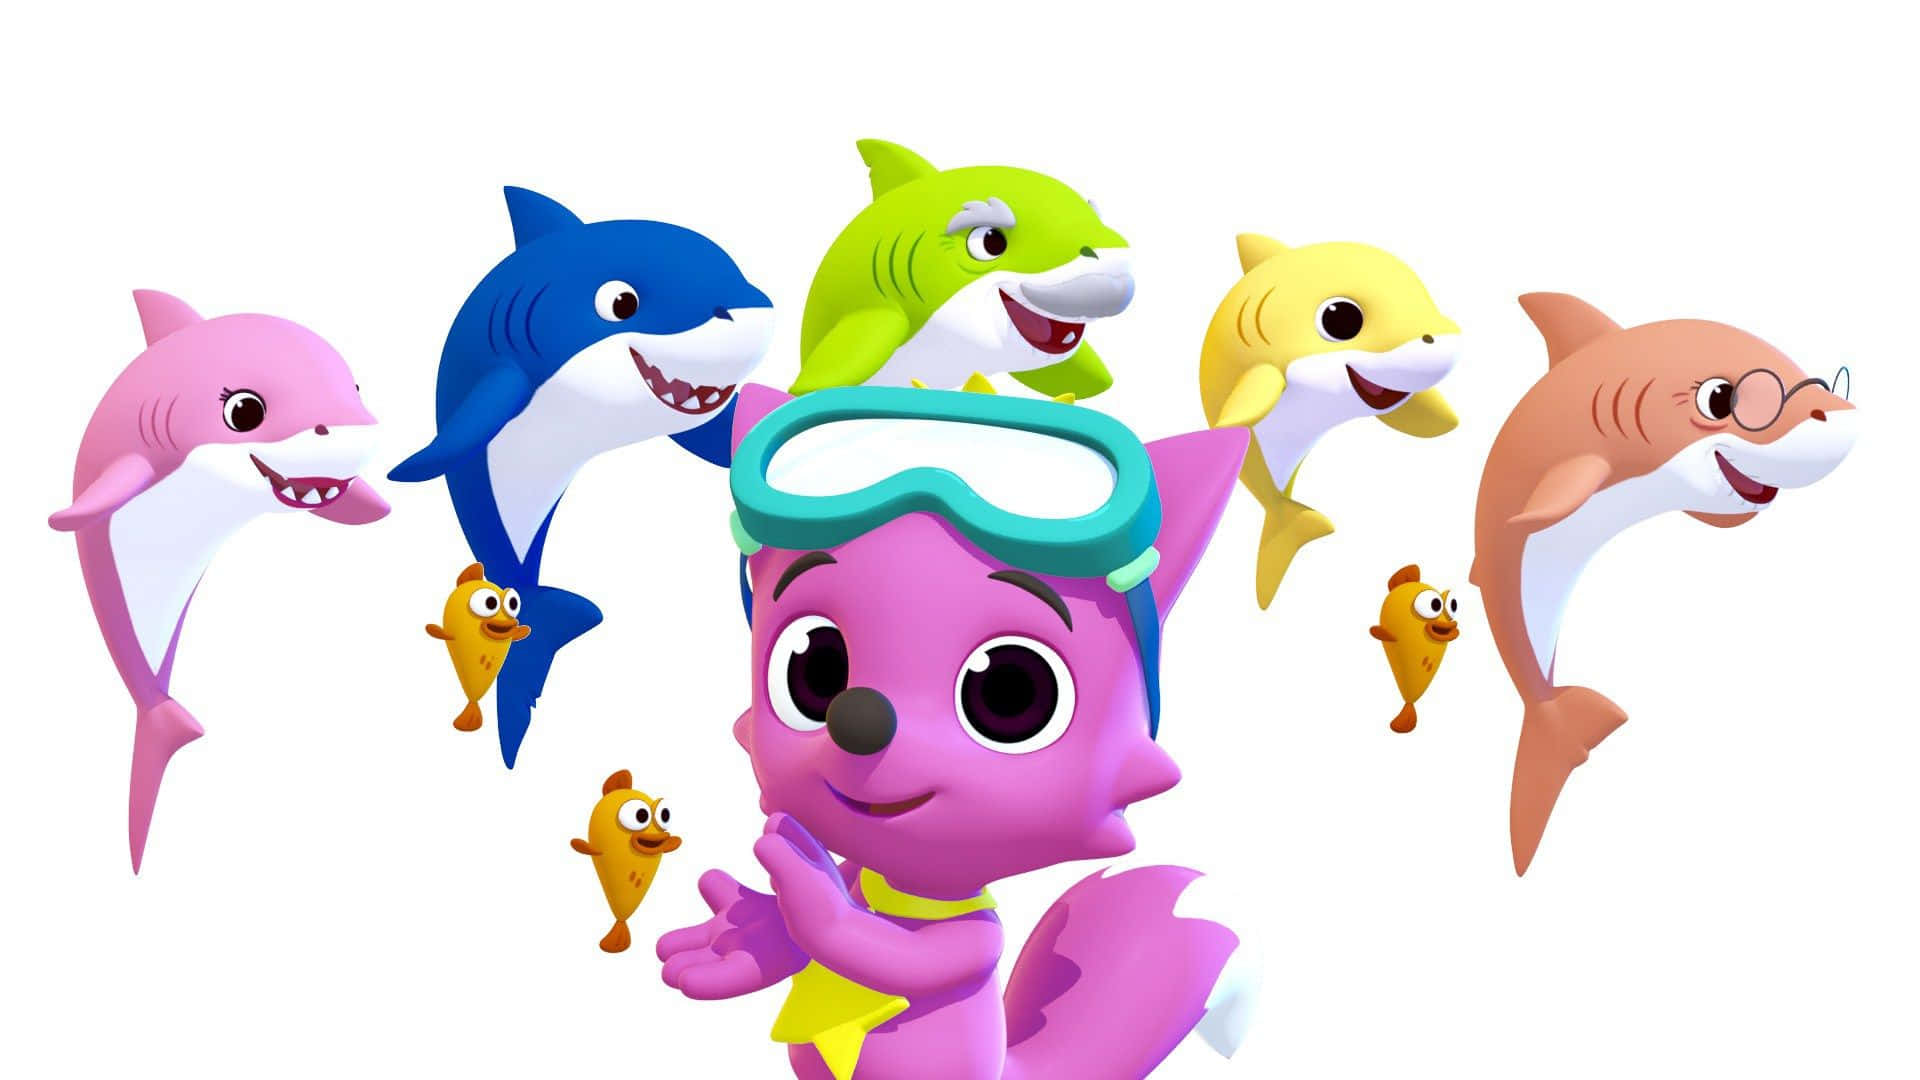 Take a break and join the baby shark on an adventure!